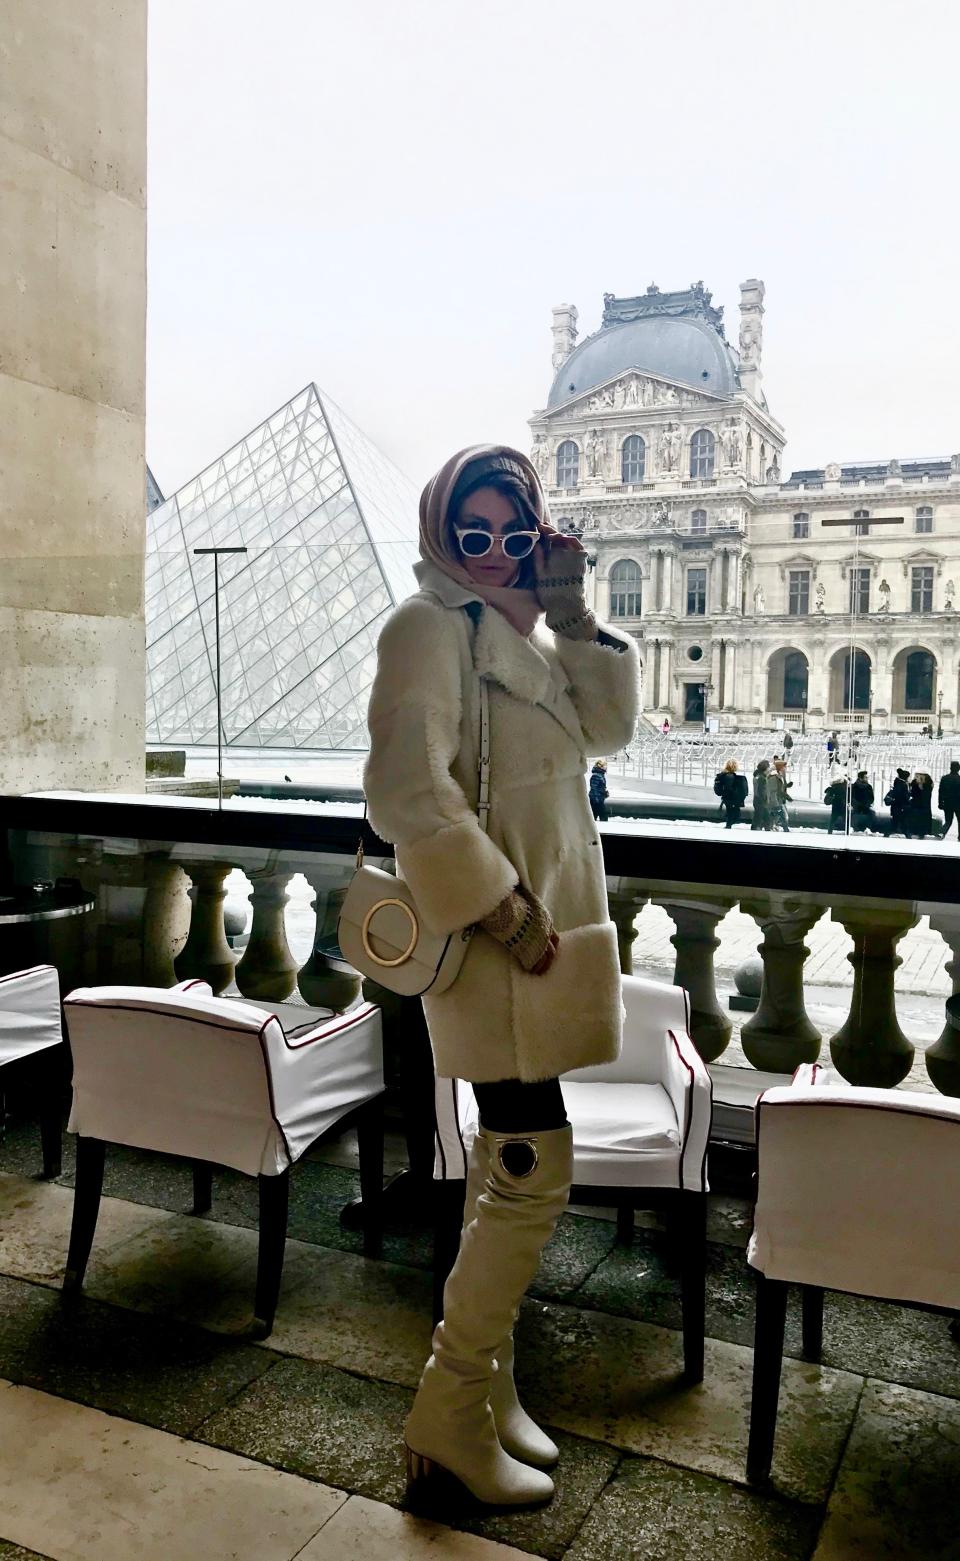 It was so cold this day, so thank goodness I had my Dhela shearling coat and these amazing white Salvatore Ferragamo boots to keep me warm! Sunnies from Cutler and Gross.